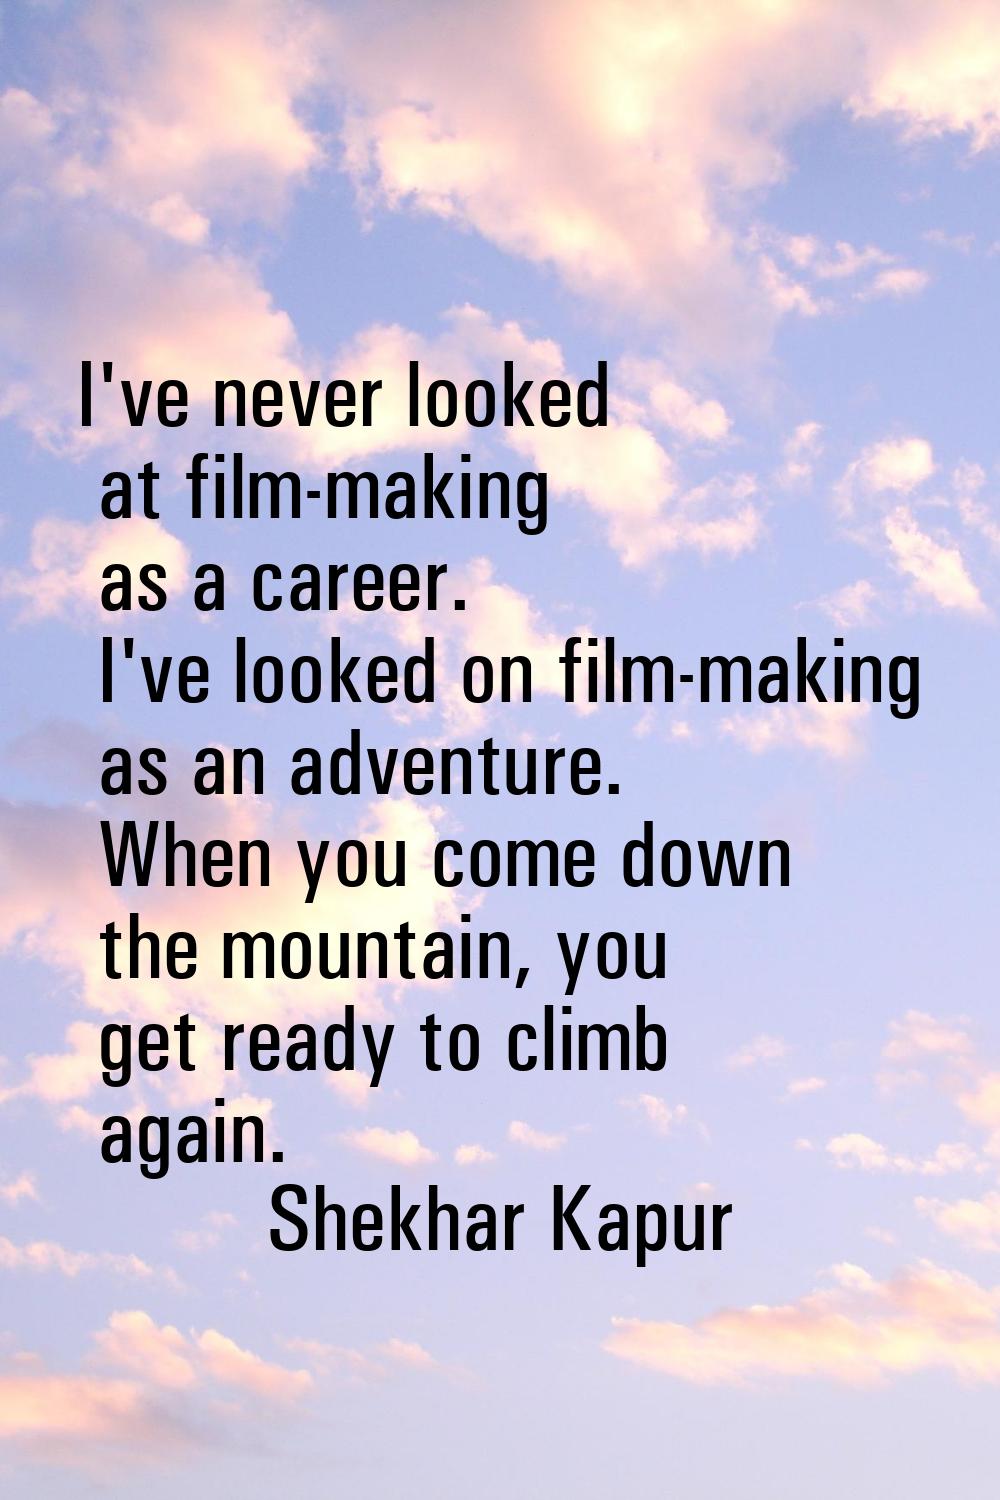 I've never looked at film-making as a career. I've looked on film-making as an adventure. When you 